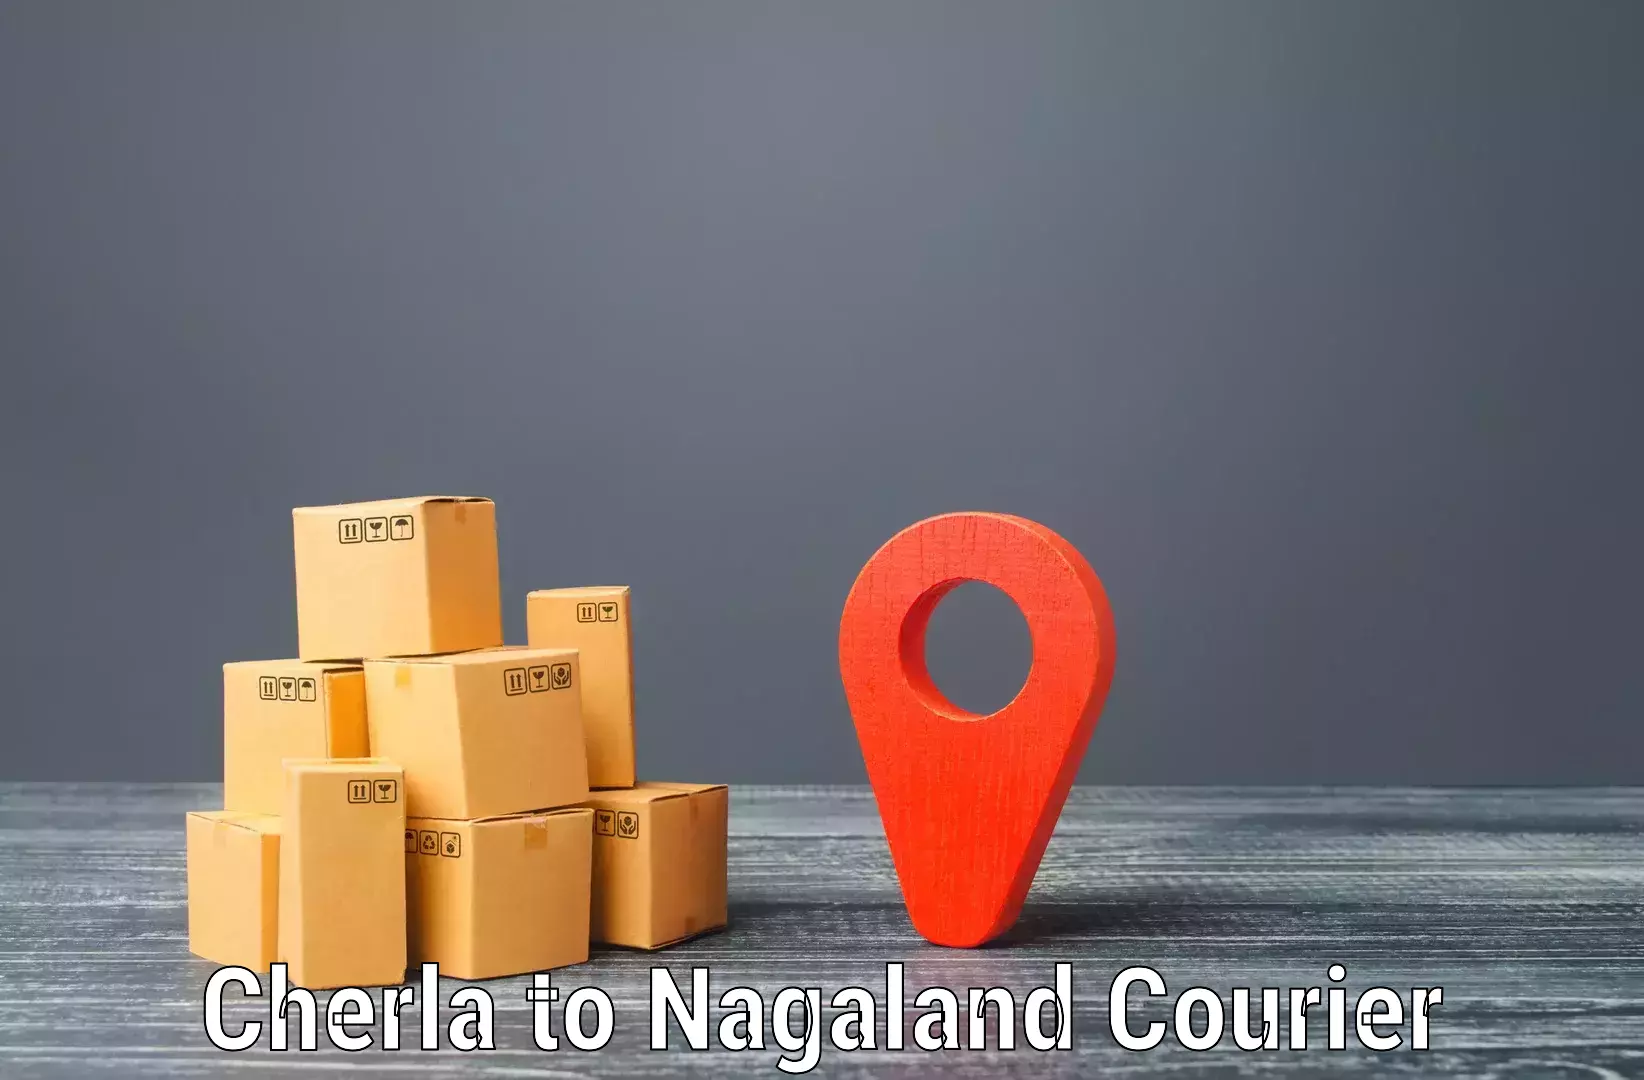 Express delivery network Cherla to Nagaland